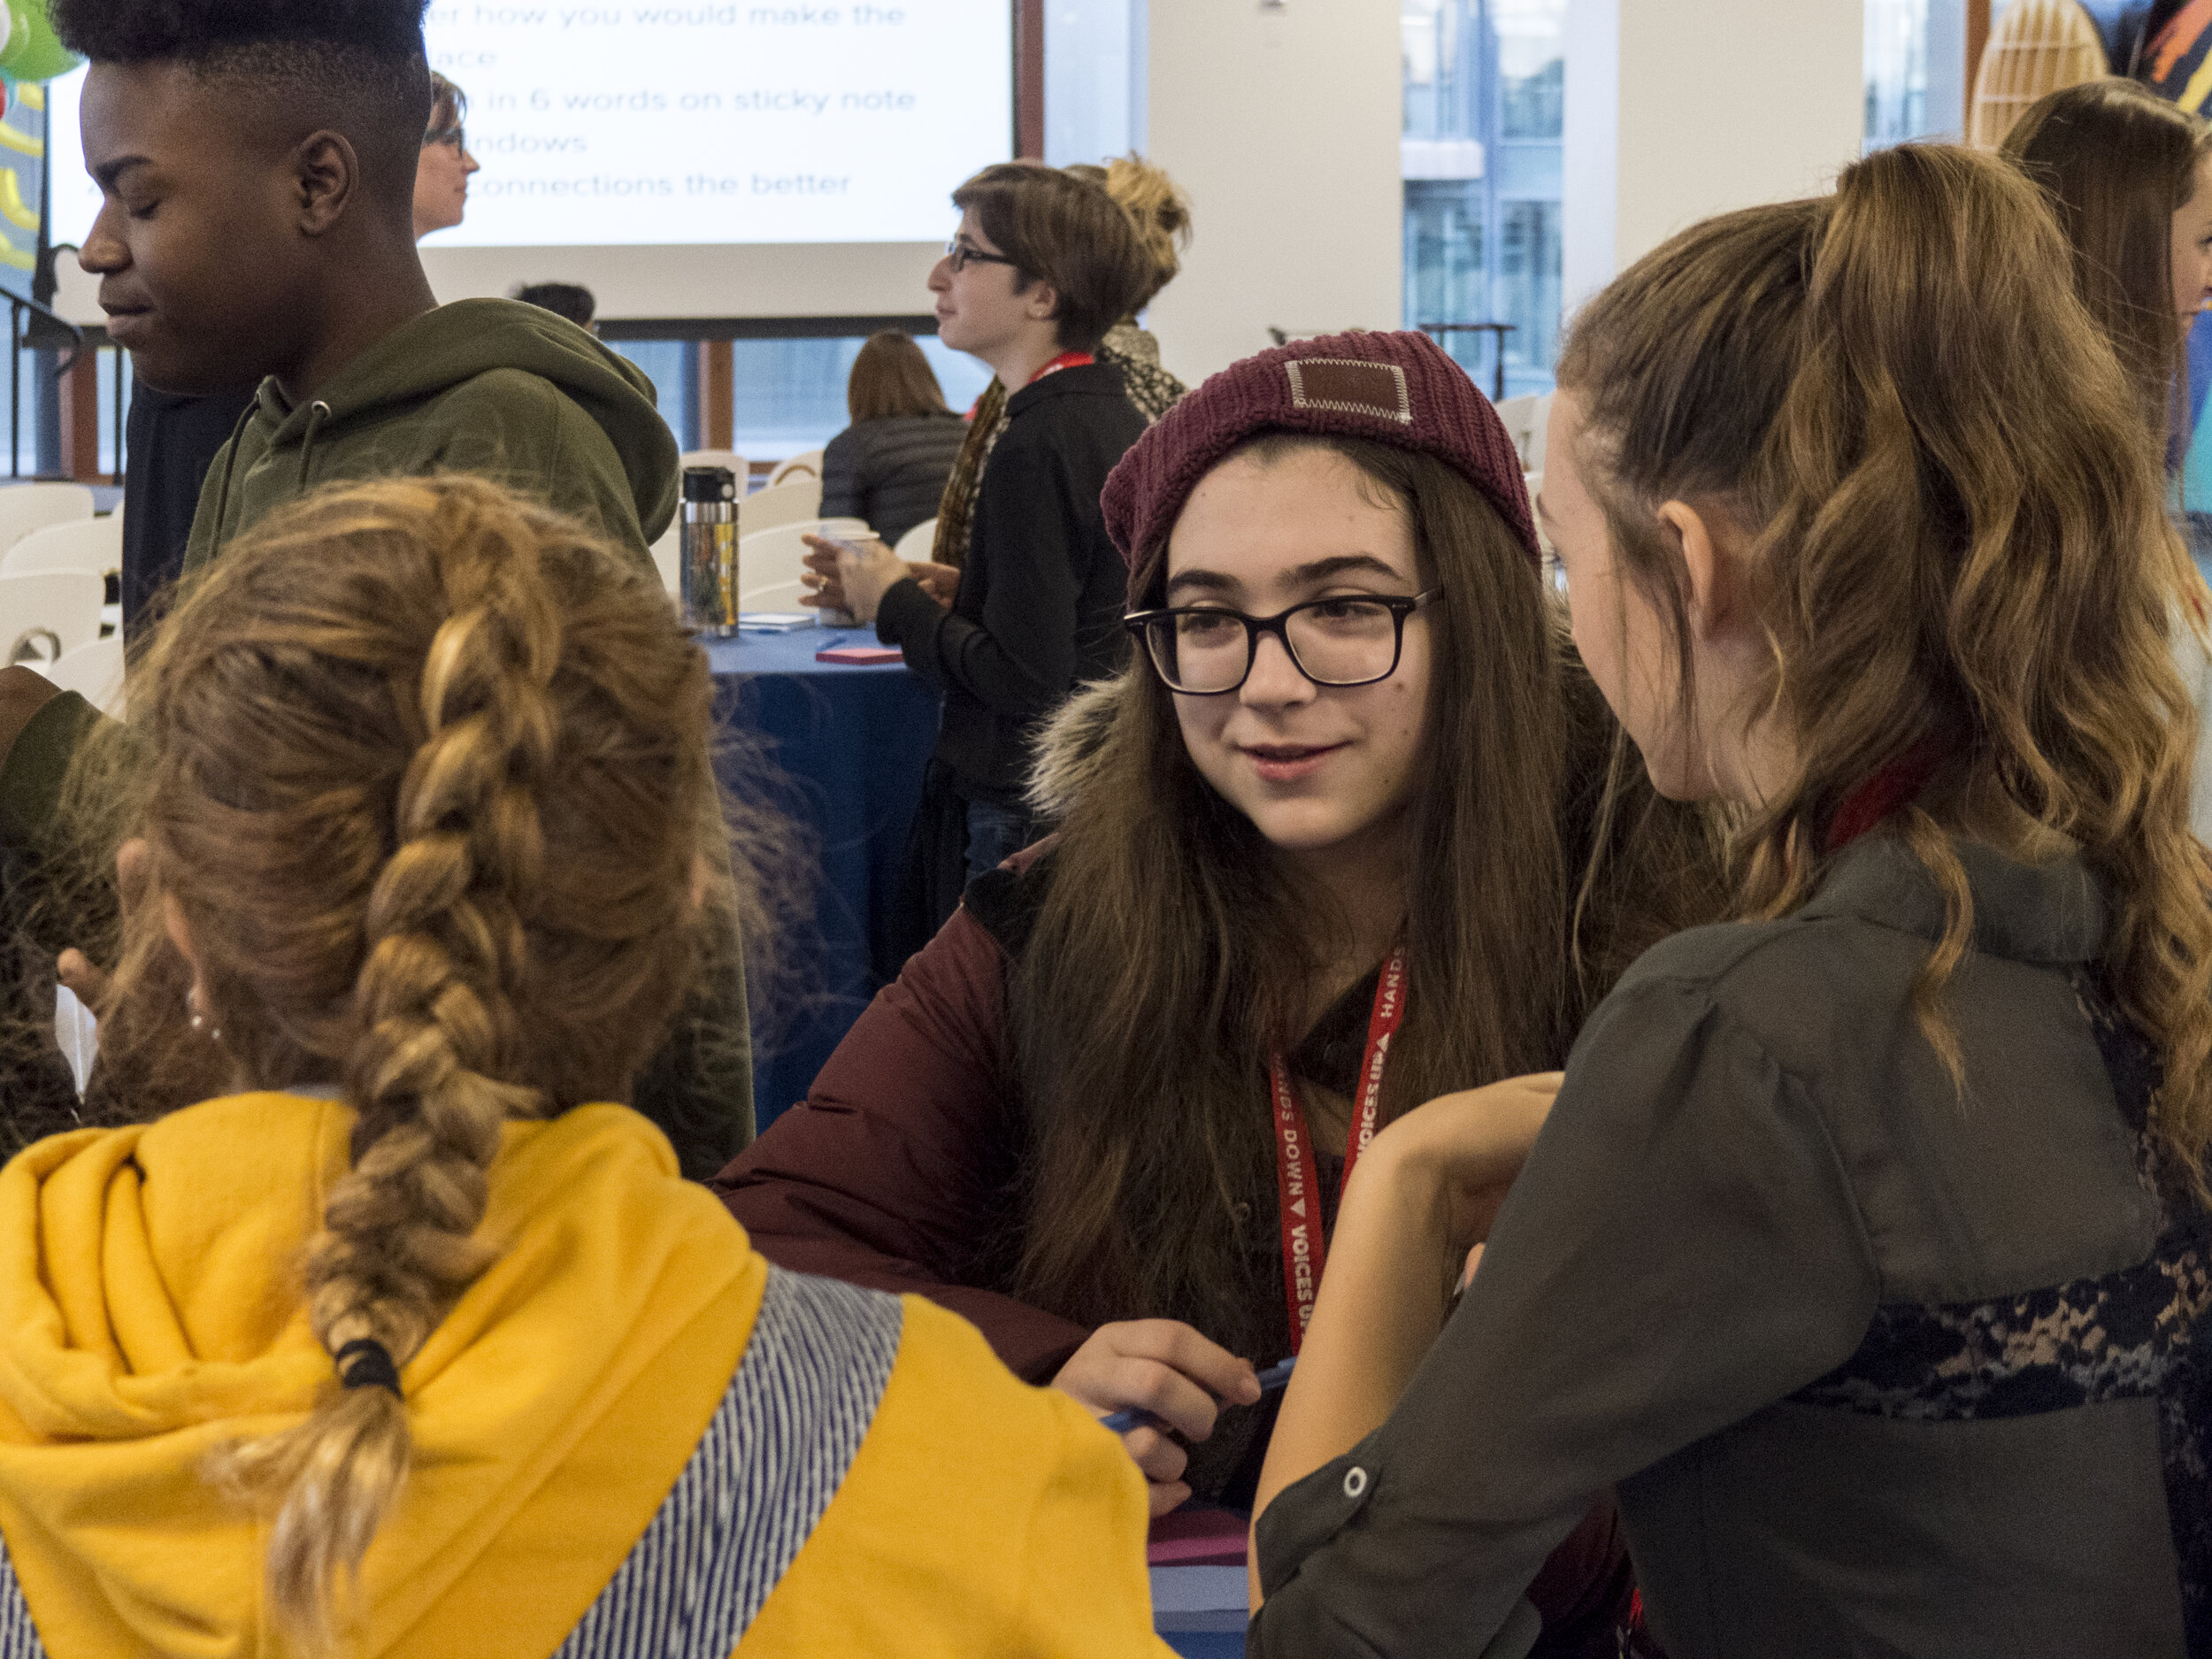  Workspace learner Sophia visits with One Stone students during a meet-and-greet session. Sophia was one of several students who chose to address the issue of false imprisonment during the final day of Hands Down, Voices Up. 